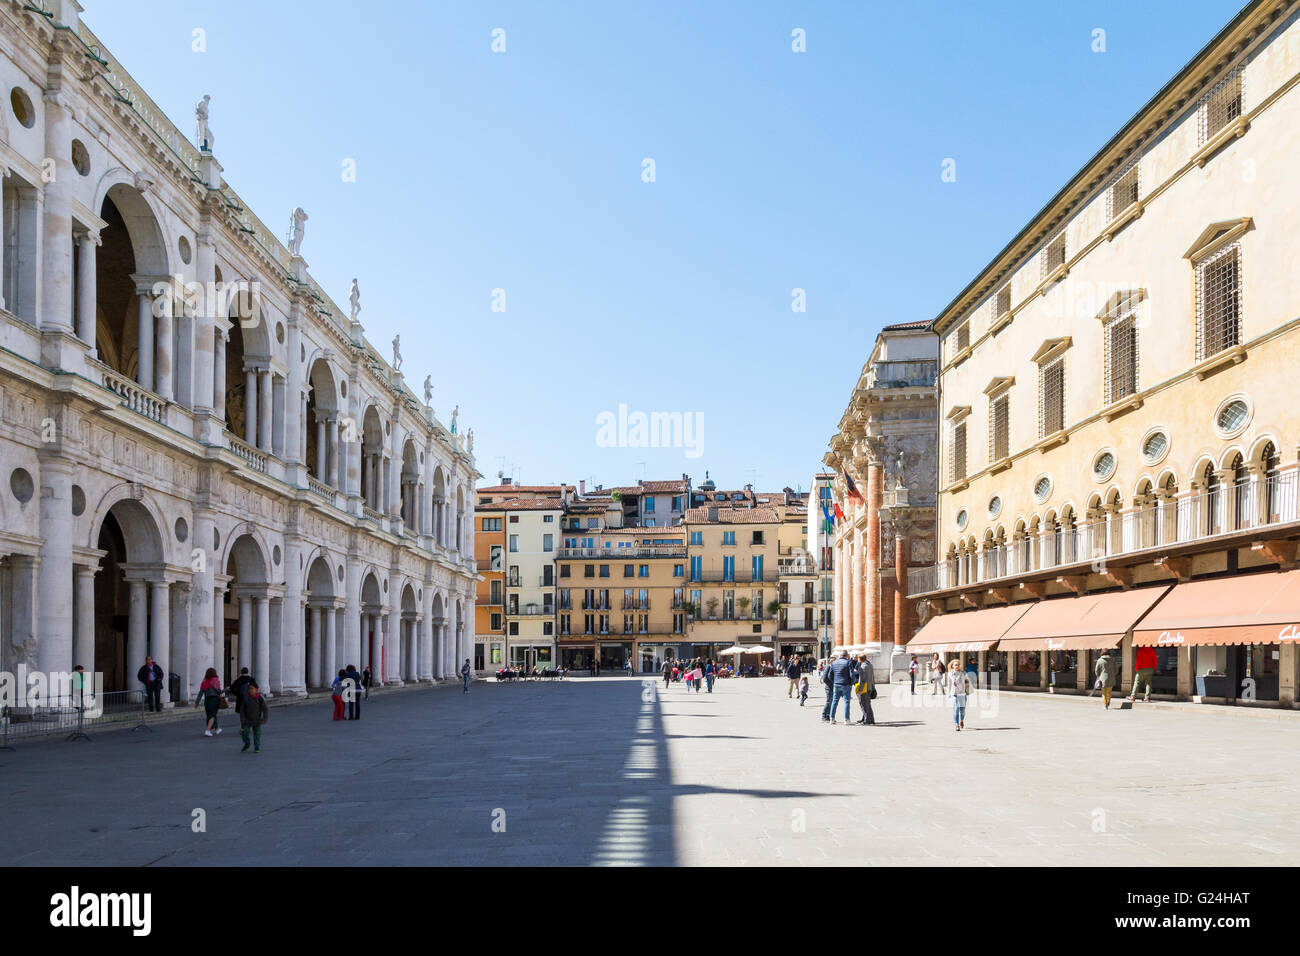 Vicenza,Italy-April 3,2015:people walk and admire  the famous town square  named Piazza dei Signor in Vicenza, Italy during a su Stock Photo